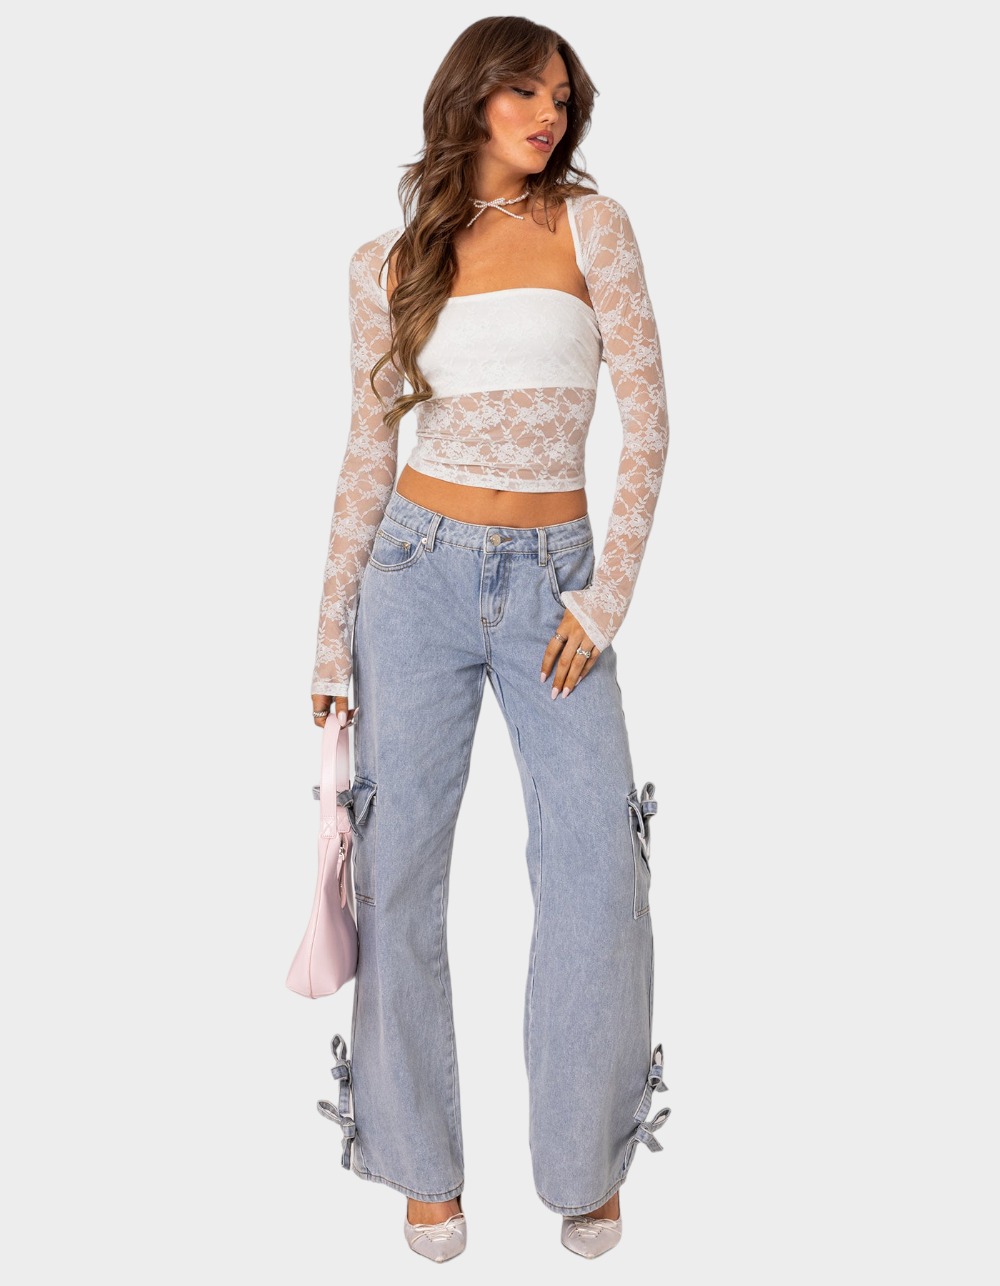 Two WHITE Addison Lace Top Piece Tillys | - EDIKTED Sheer